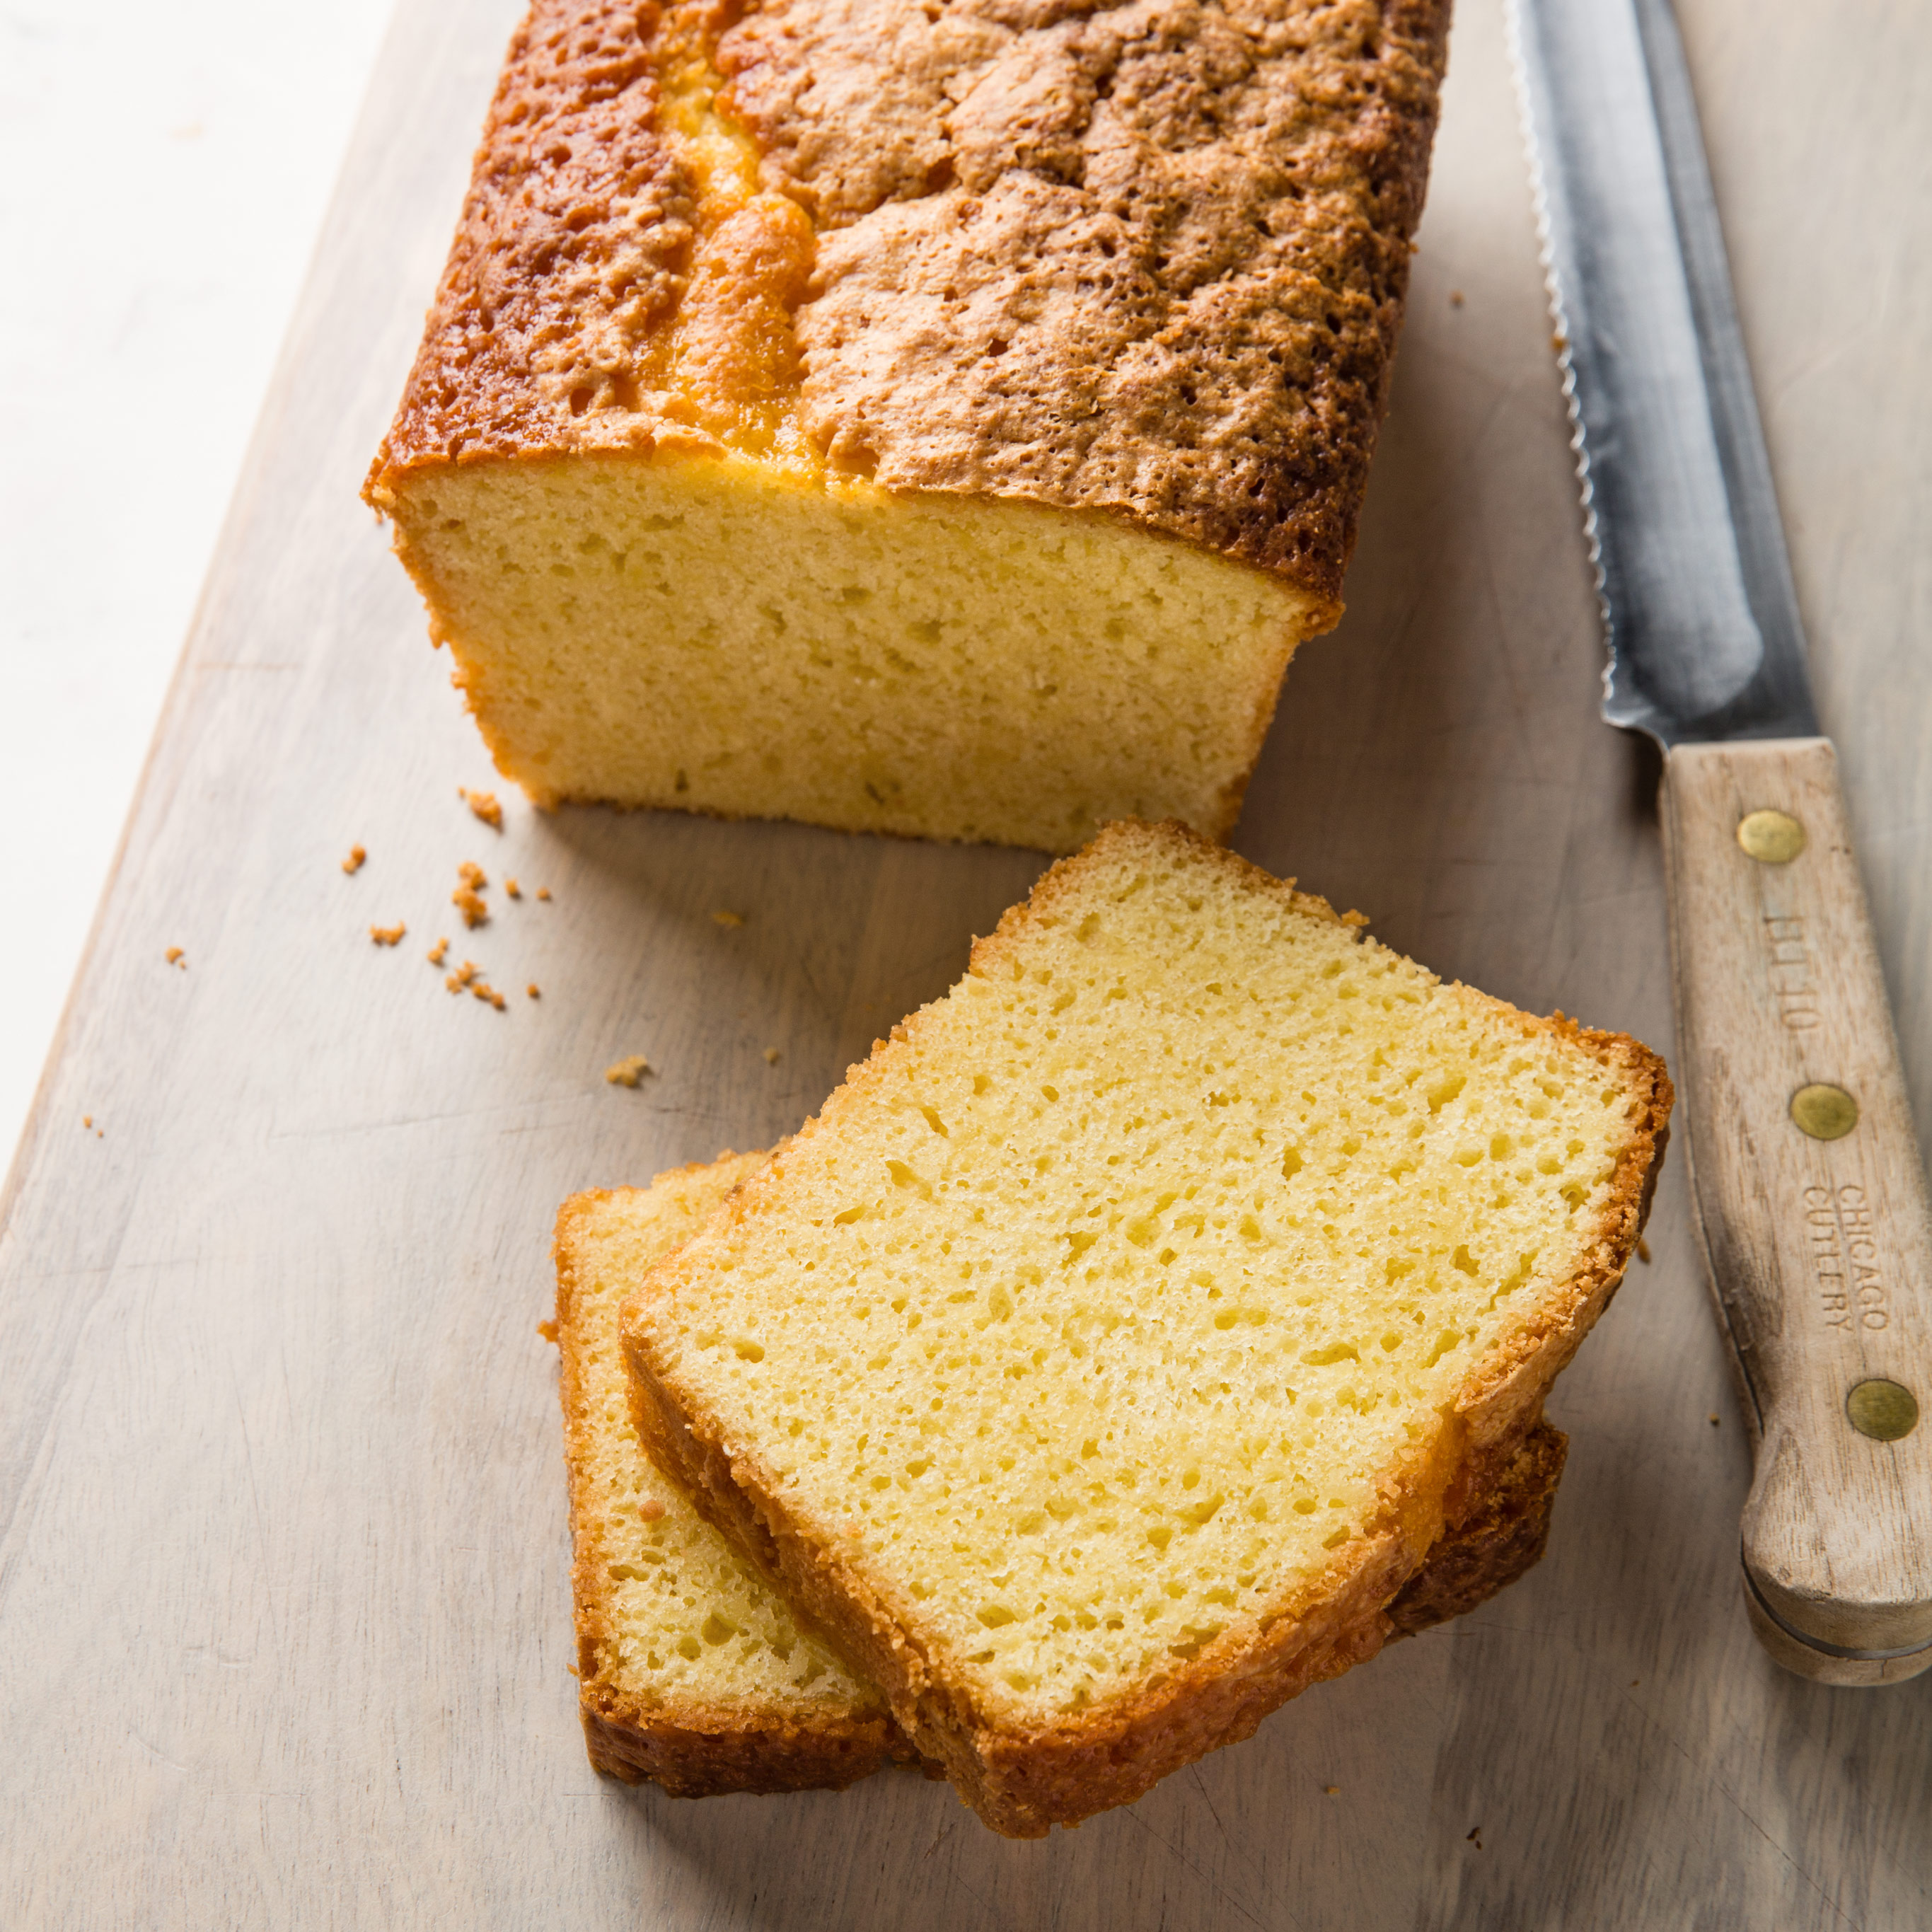 Perfect Pound Cake – Must Love Home